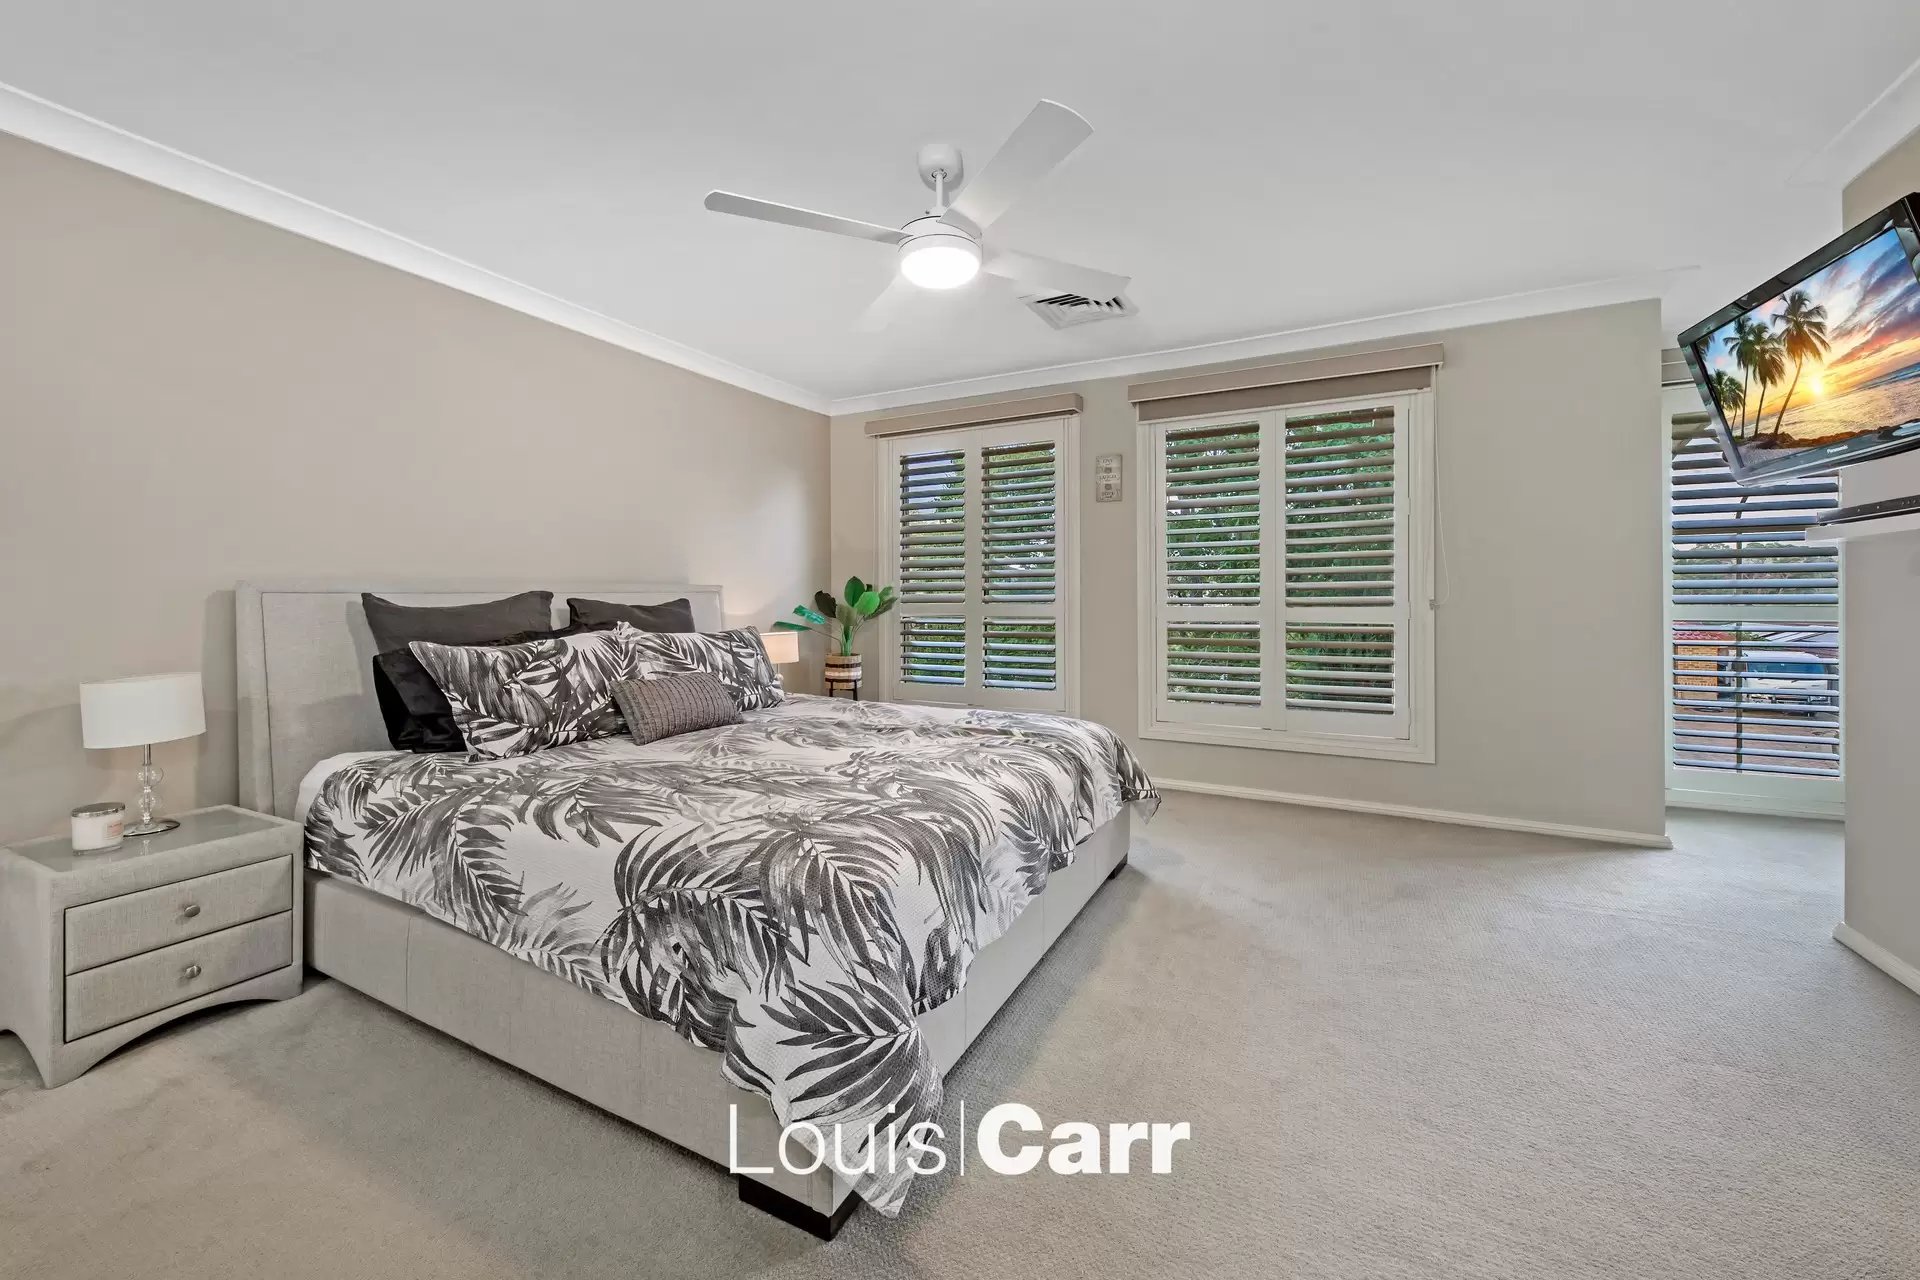 Photo #11: 4 Rooke Court, Kellyville - Sold by Louis Carr Real Estate